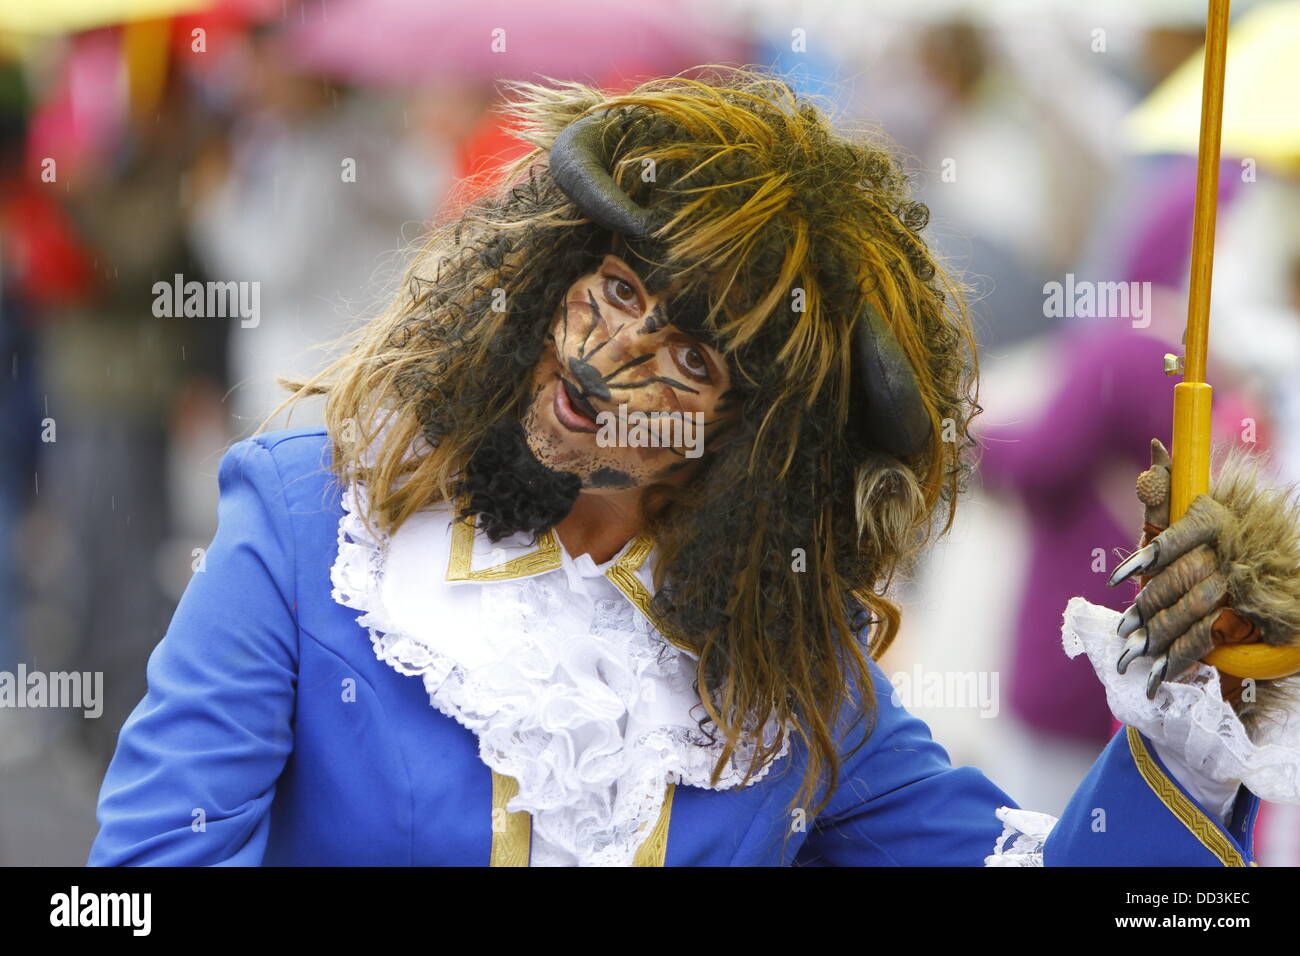 Worms, Germany. 25th August 2013. A participant of the Backfischfest parade 2013 is pictured dressed as a lion. The first highlight of this year's Backfischfest was the big parade through the city of Worms with over 100 groups and floats. Community groups, sport clubs, music groups and business from Worms and further afield took part. Credit:  Michael Debets/Alamy Live News Stock Photo